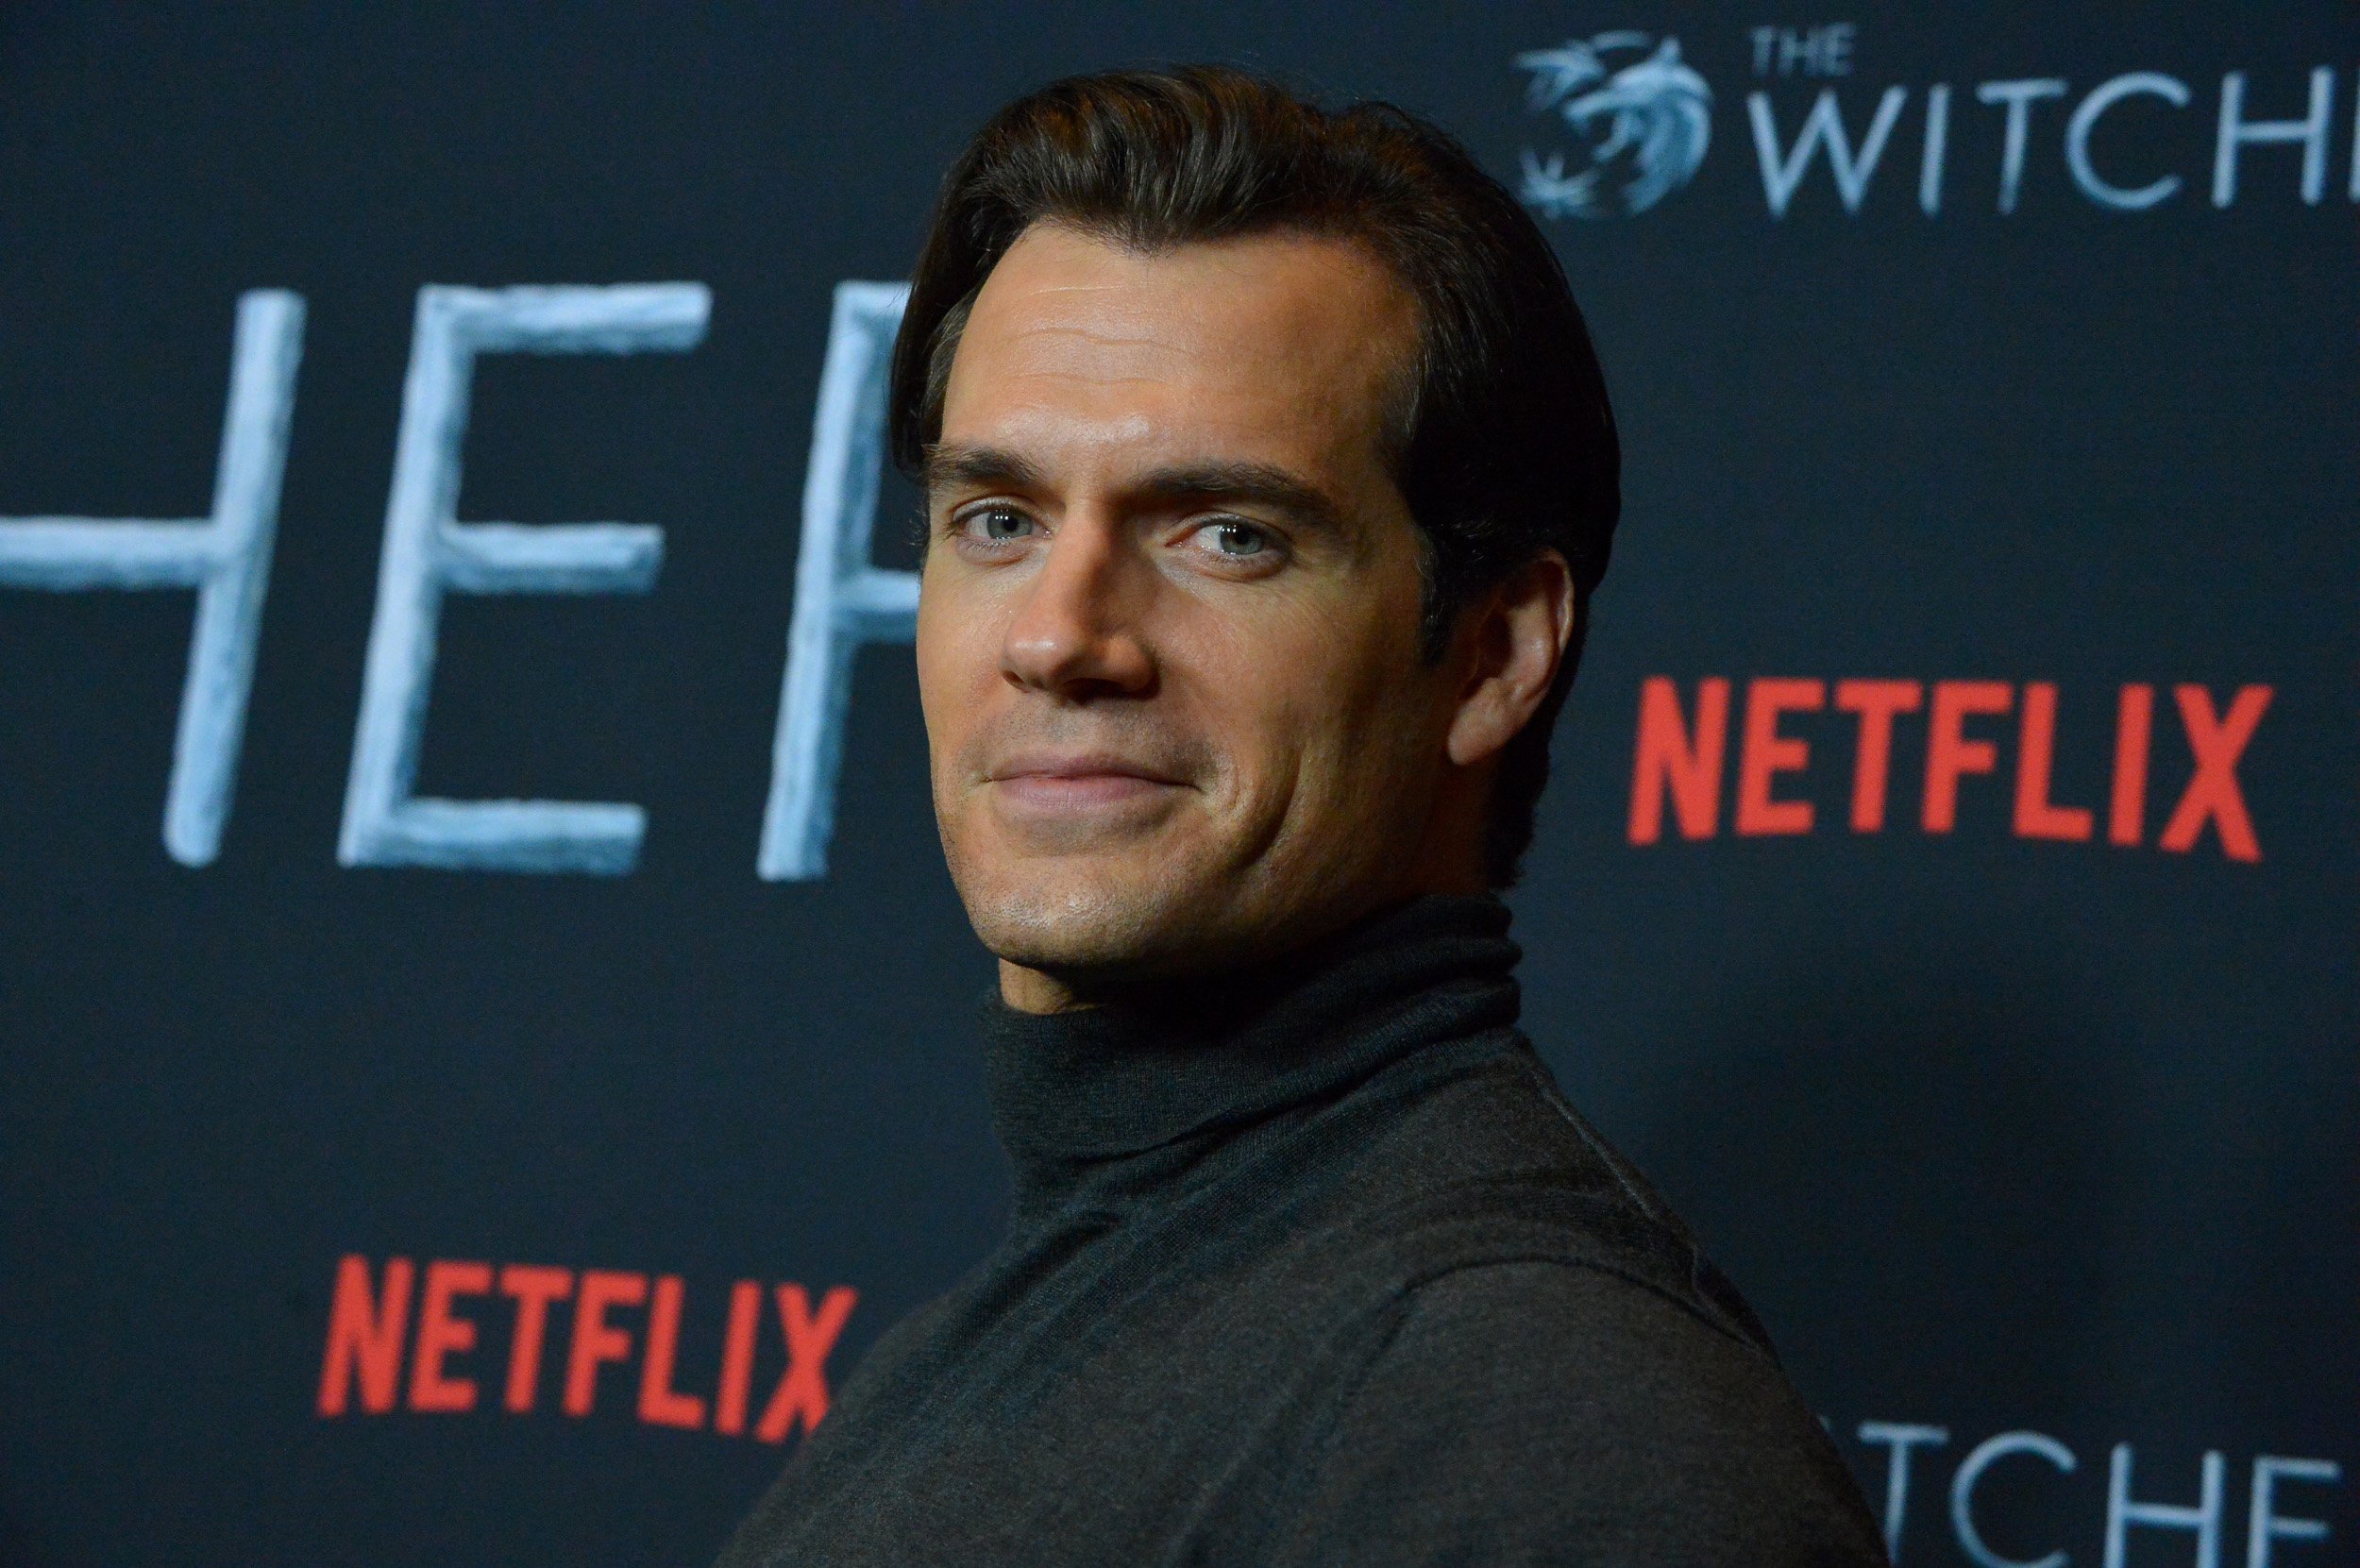 'The Witcher' star Henry Cavill wearing a black shirt and standing in front of a Netflix wall